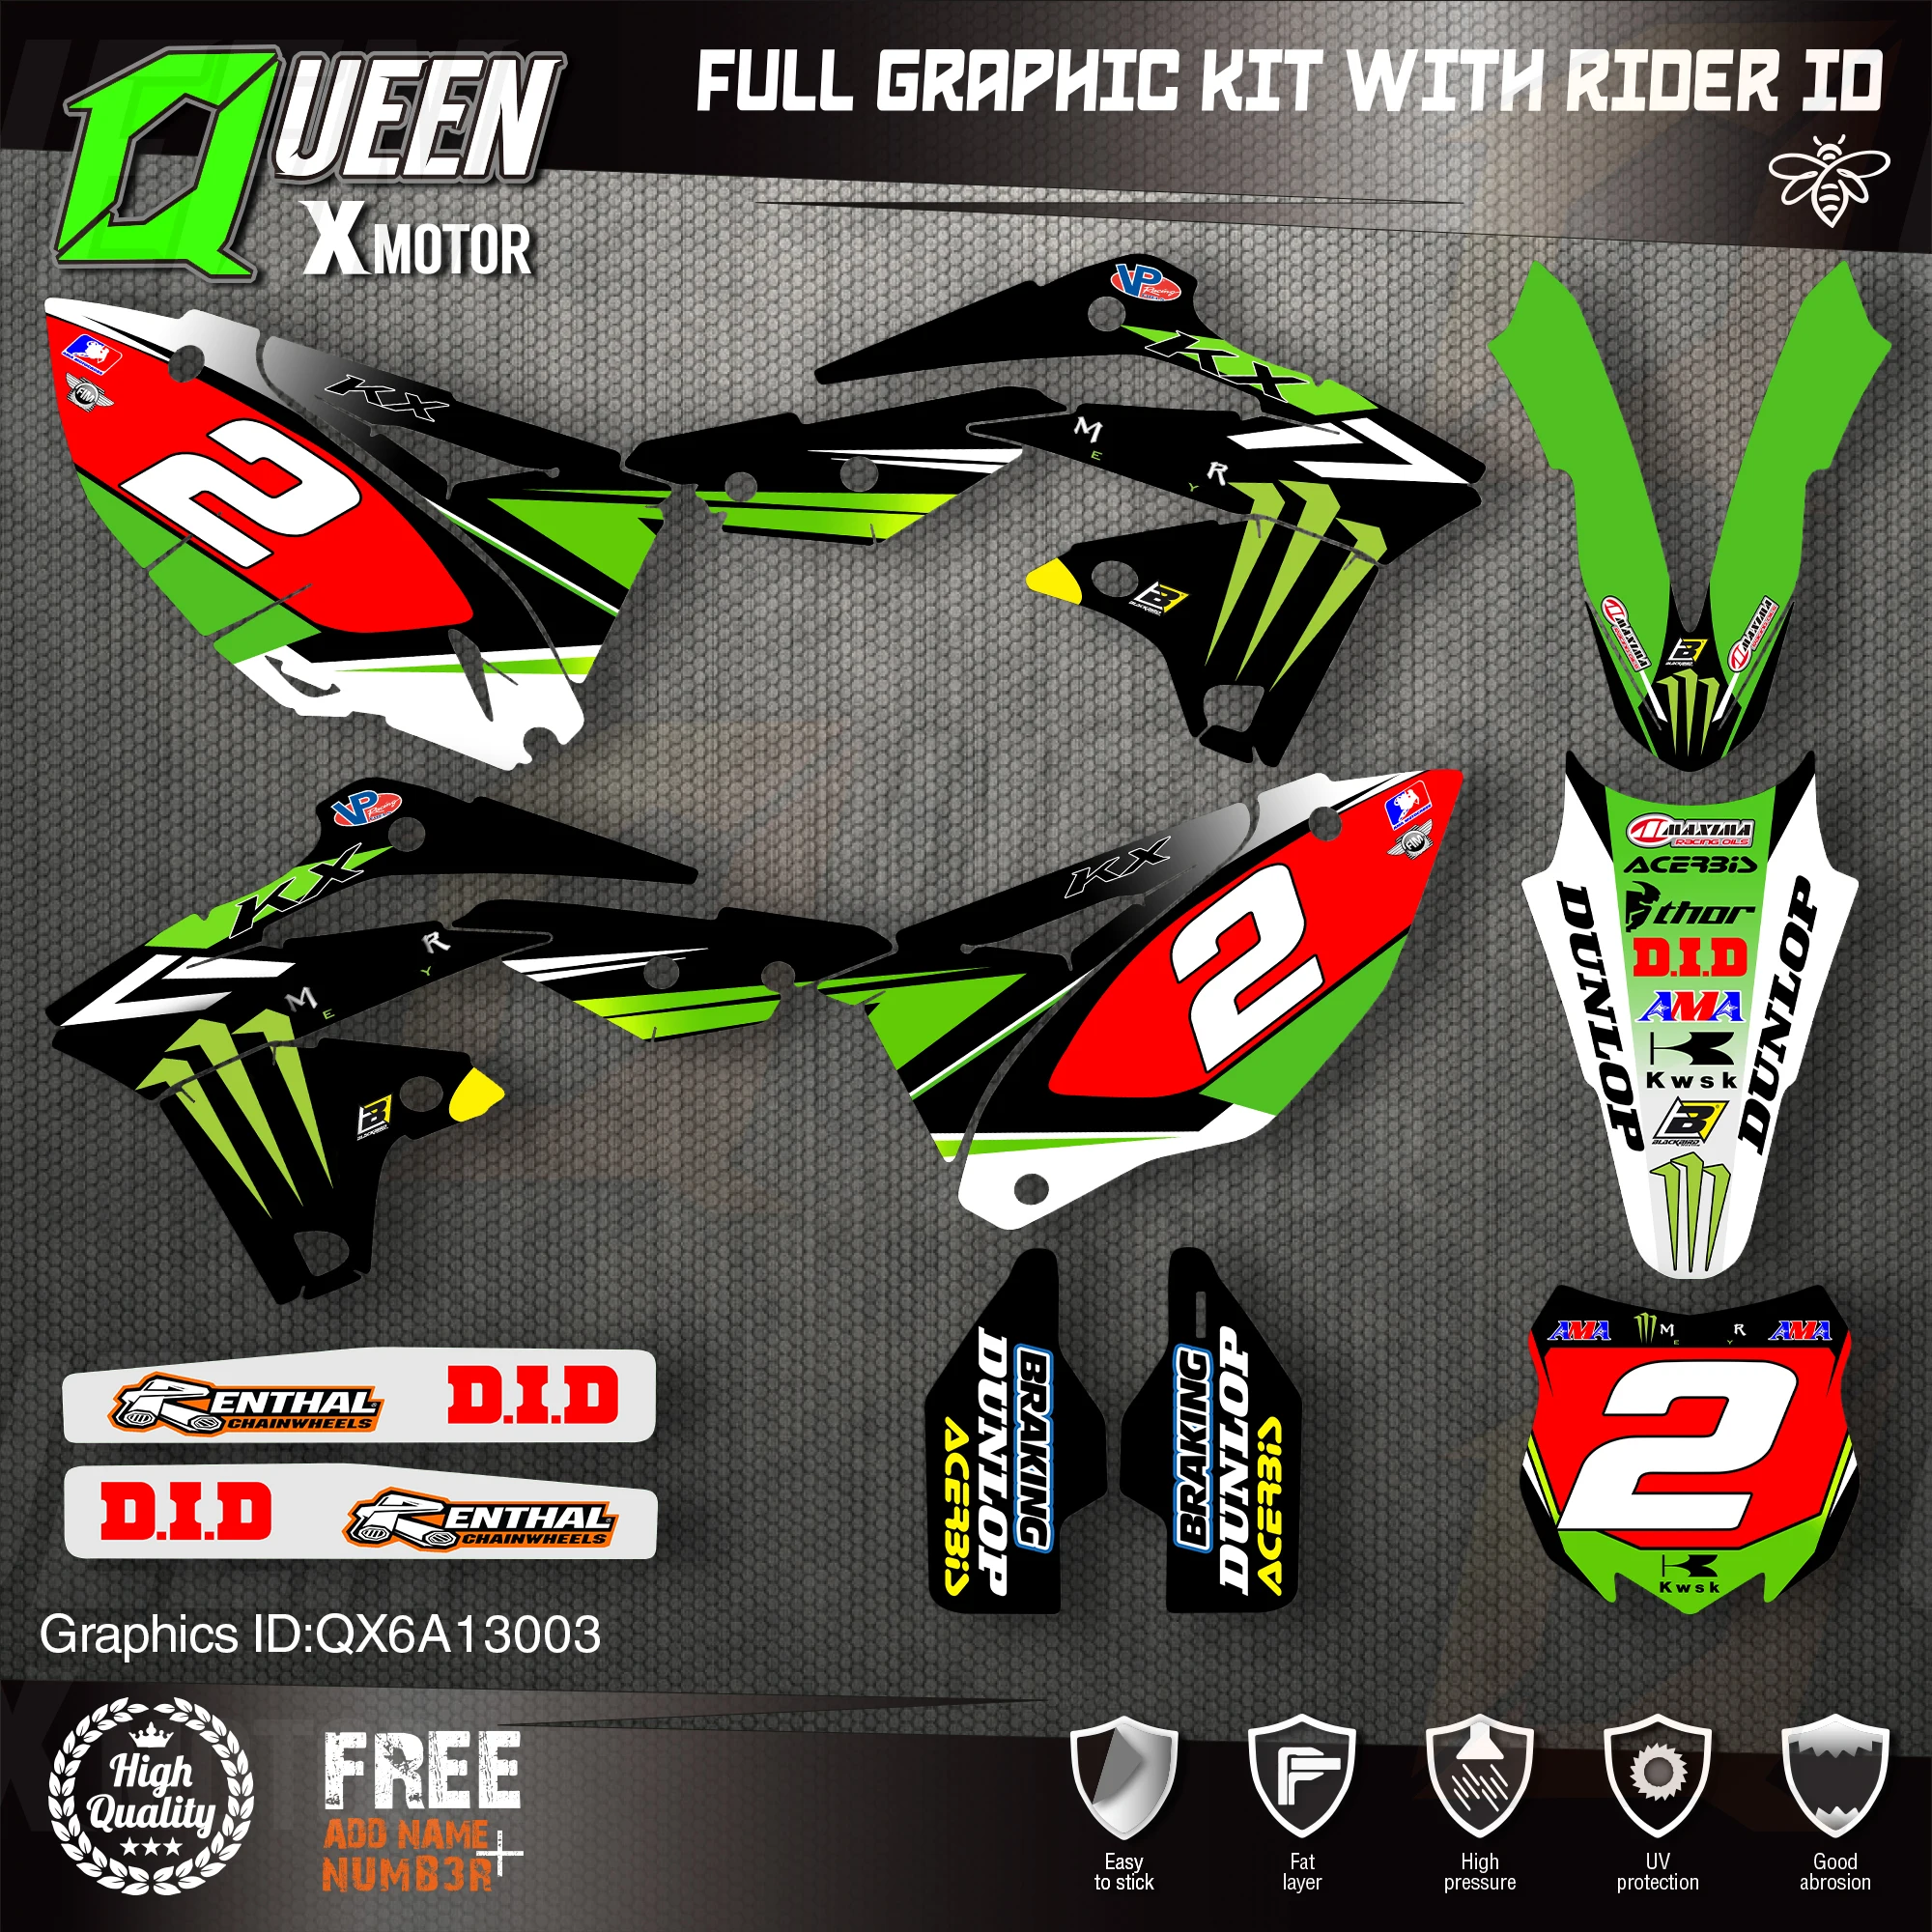 Queen X MOTOR Custom Team Graphics Decals Stickers Kit For Kawasaki Decal  2013 2014 2015 2016 KXF 250 003